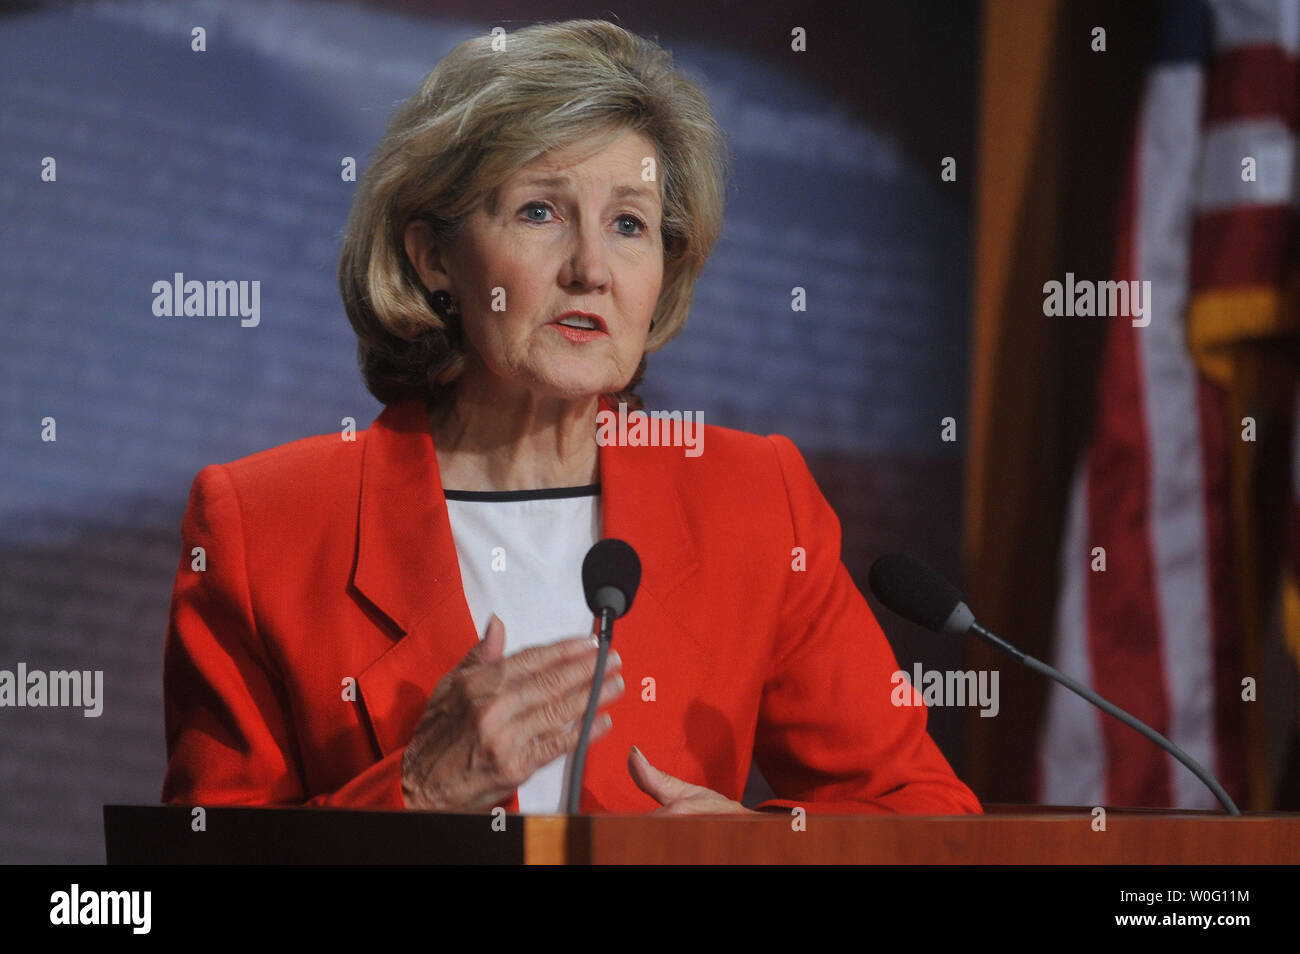 Sen. Kay Bailey Hutchison (R-TX) speaks at a press conference on the Sessions-McCaskill spending freeze bill, on Capitol Hill in Washington on September 16, 2010.   UPI/Kevin Dietsch Stock Photo